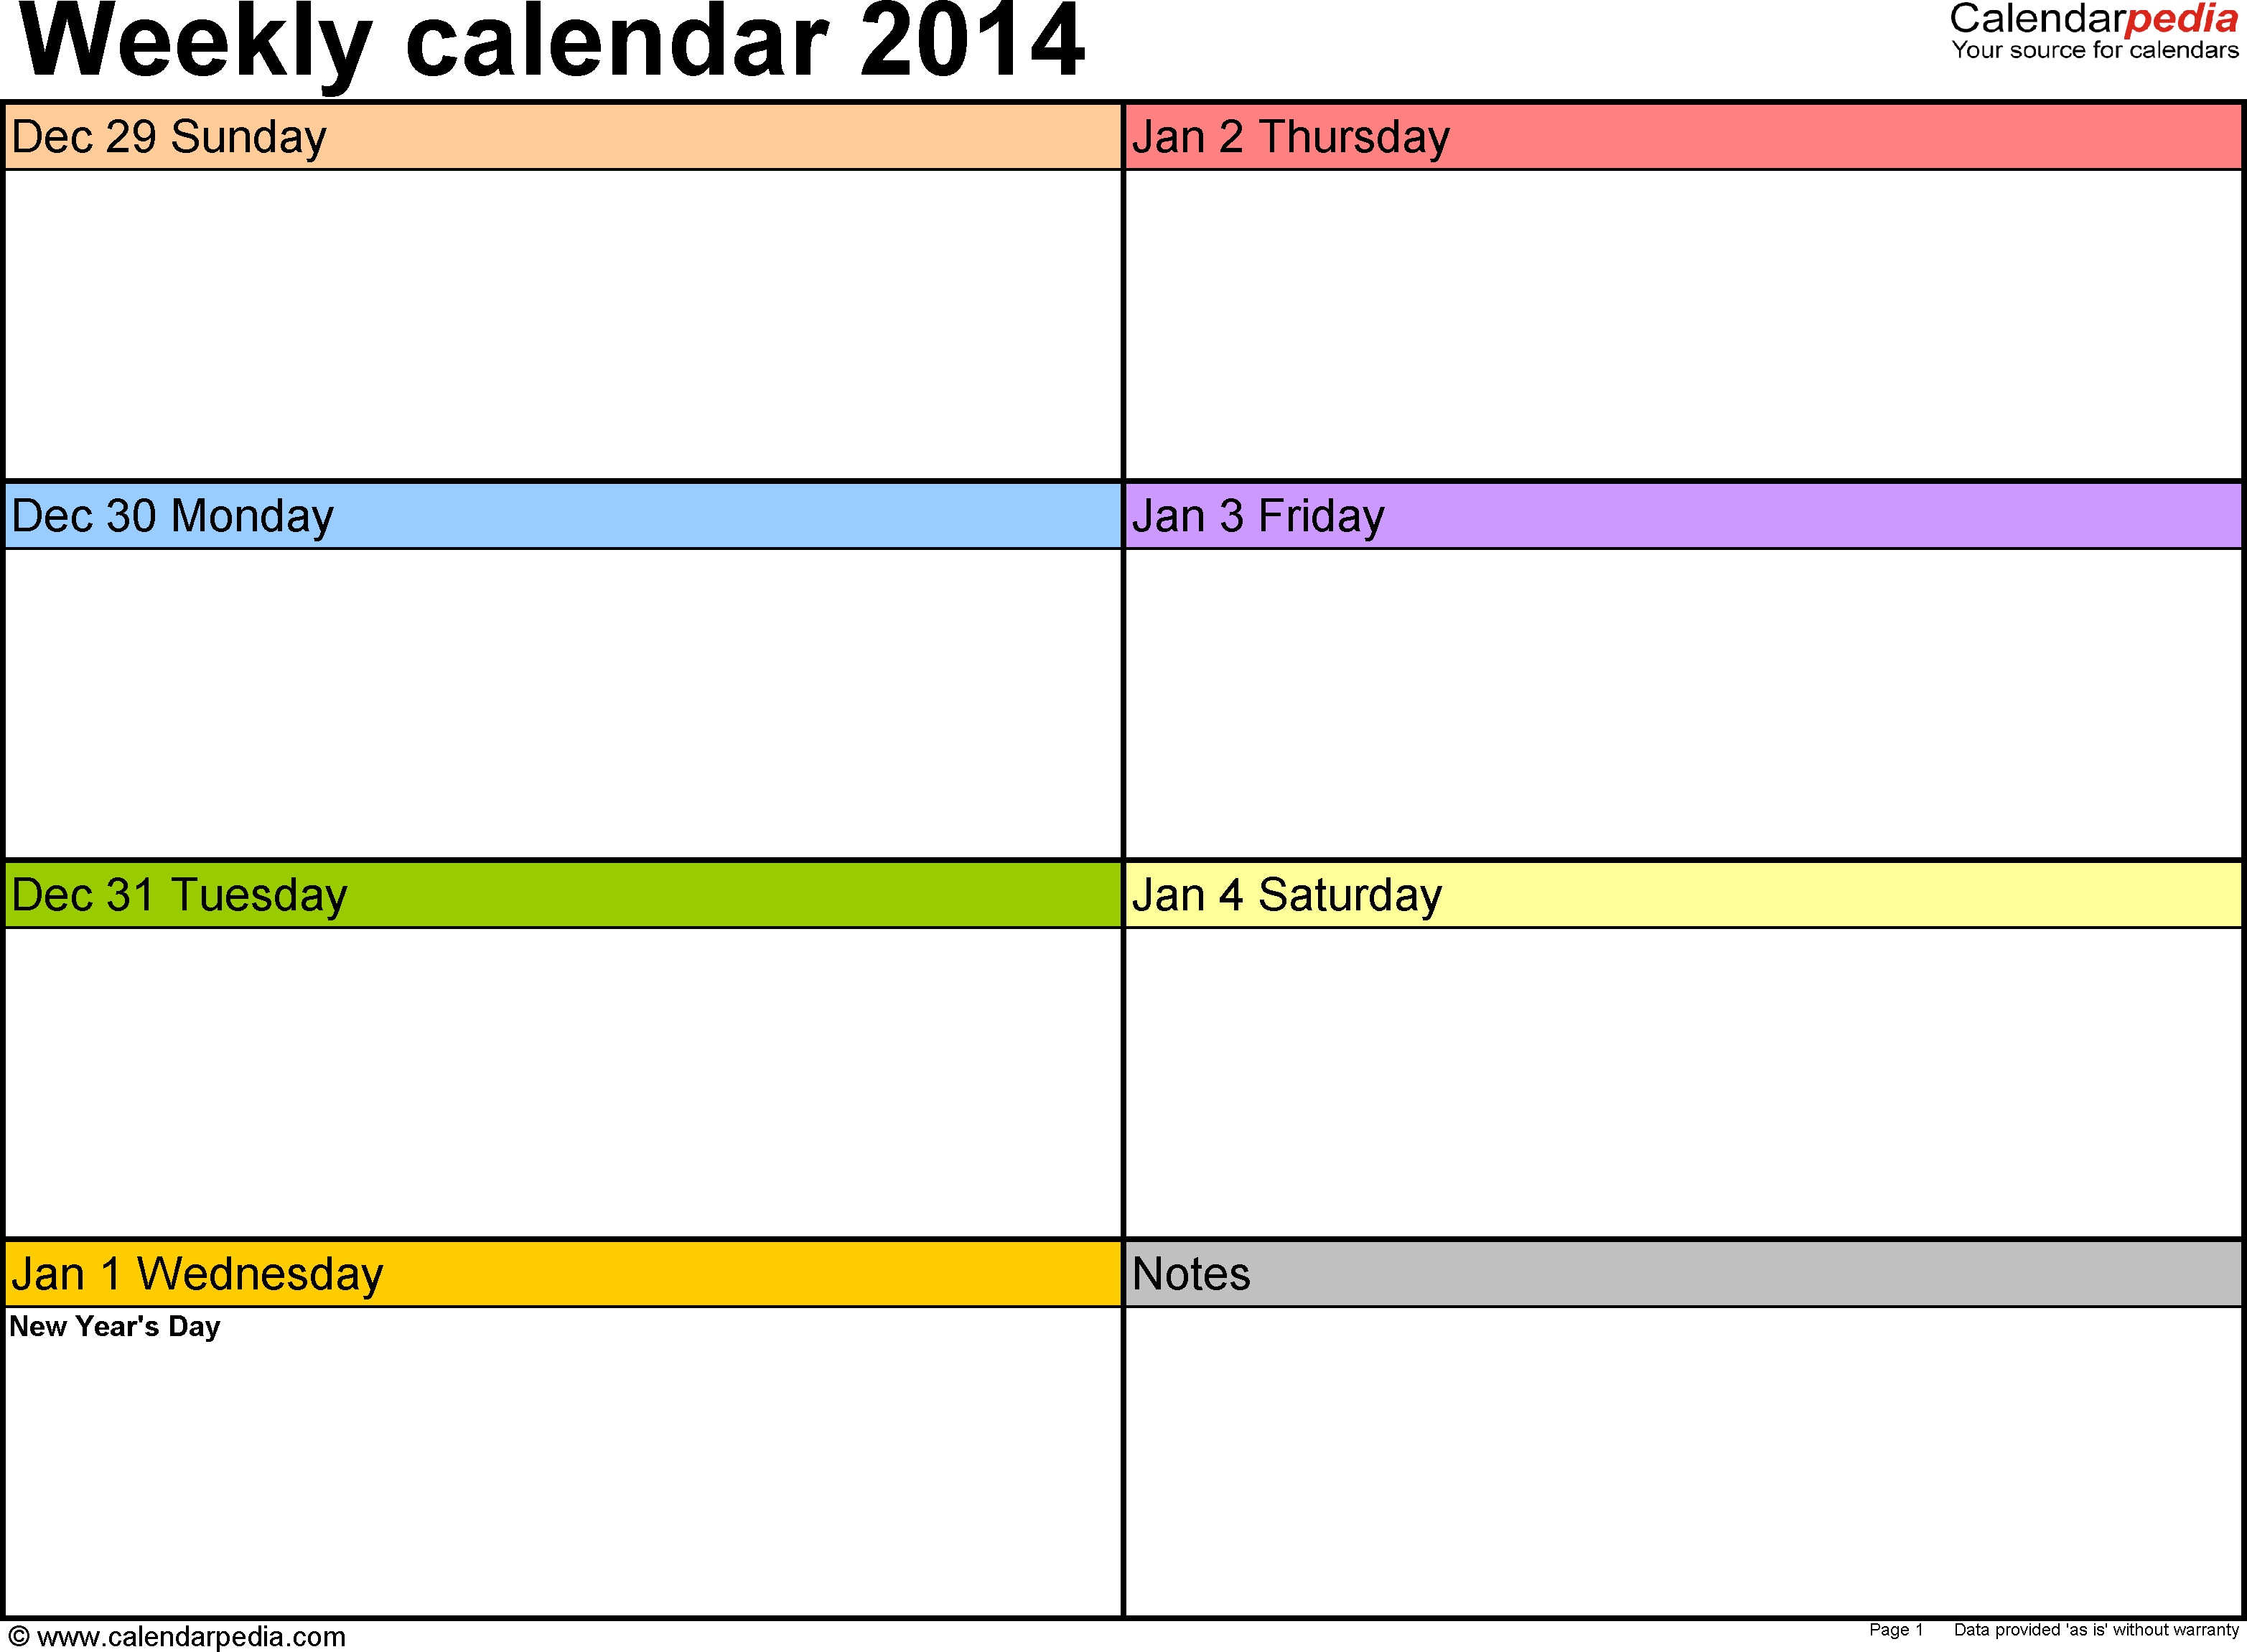 Weekly Calendars 2014 For Pdf - 4 Free Printable Templates